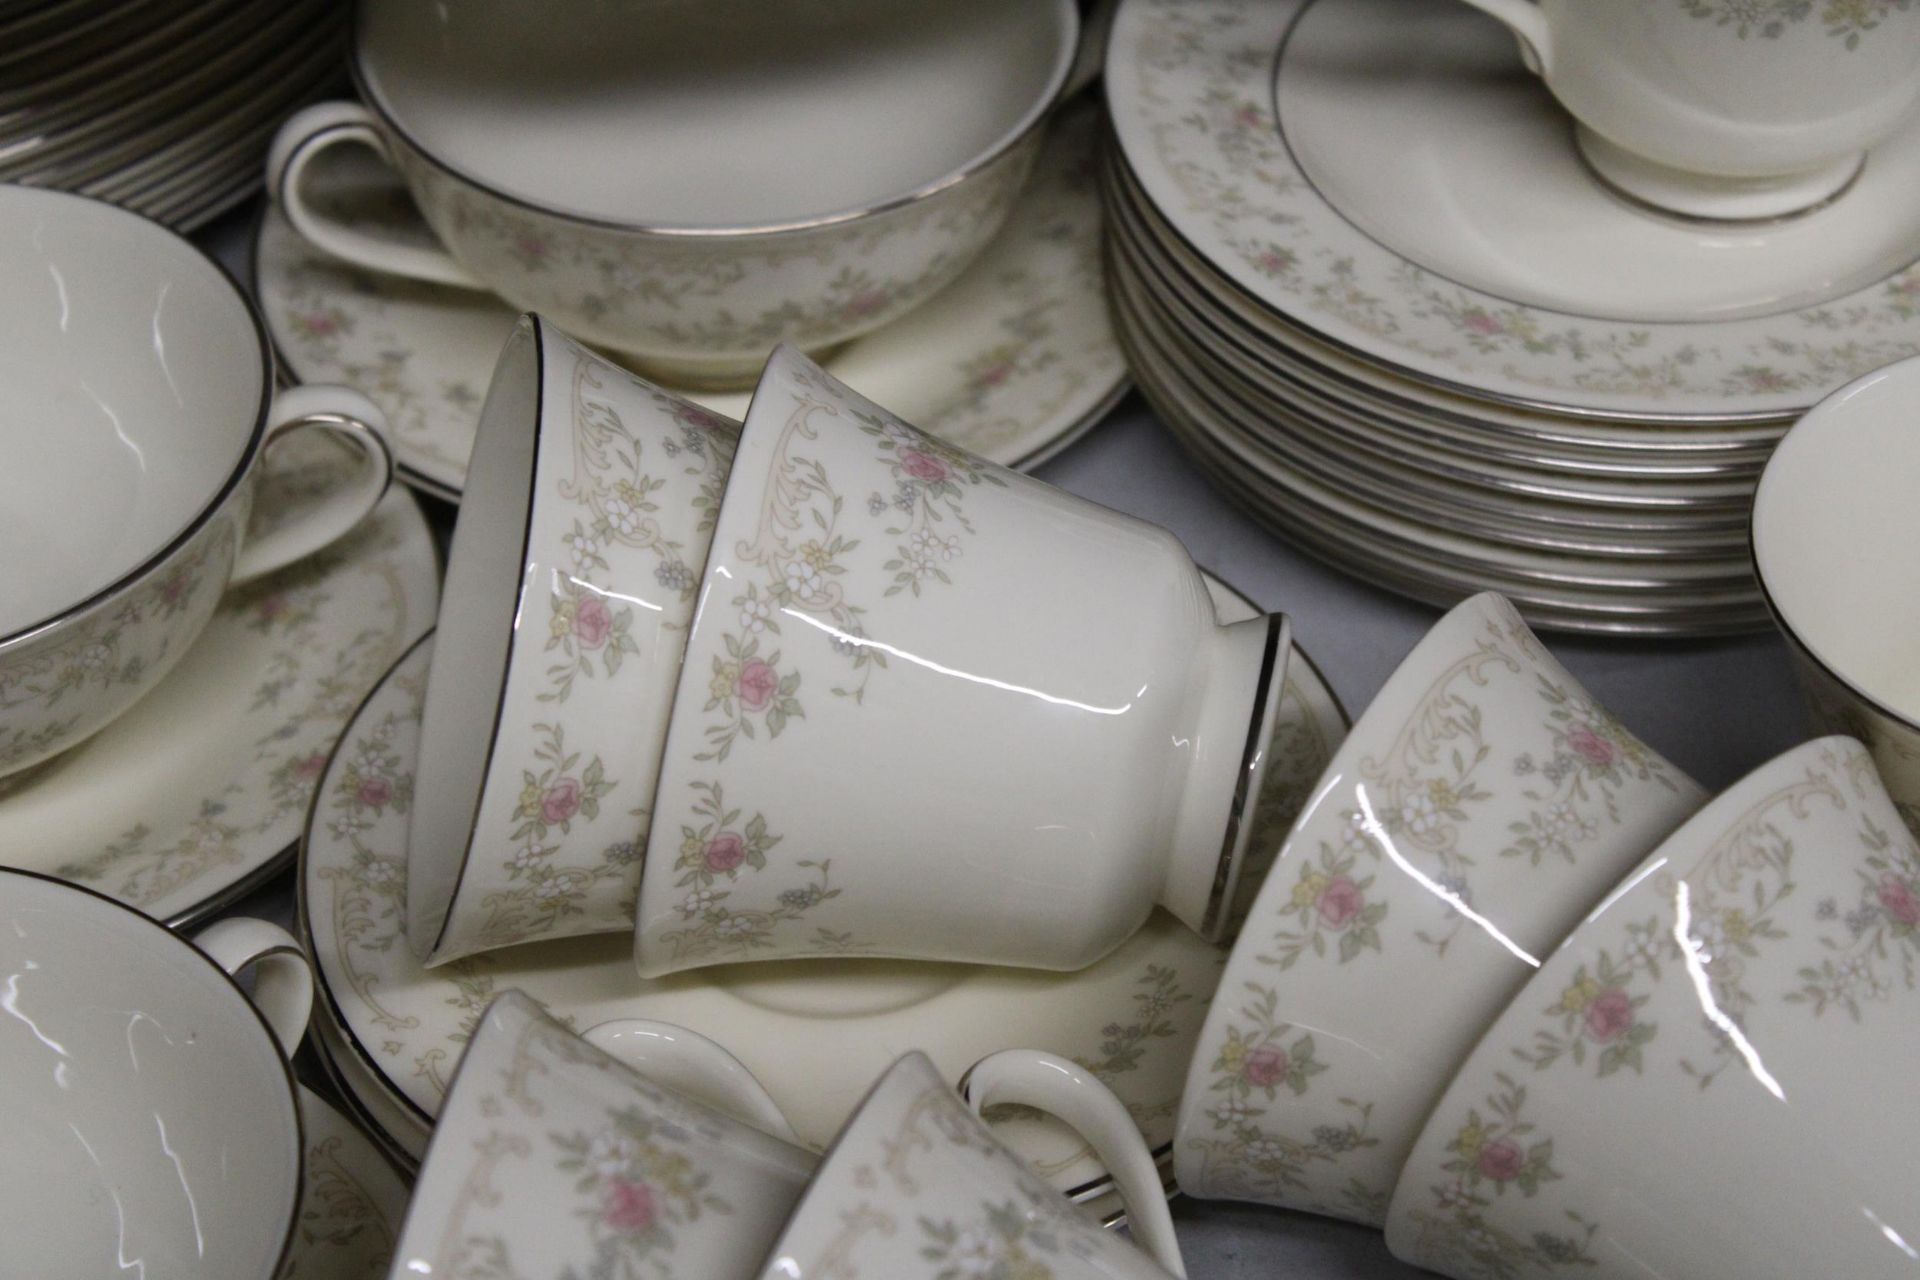 A ROYAL DOULTON 'DIANA' DINNER SERVICE TO INCLUDE SERVING TUREENS, VARIOUS SIZES OF PLATES, SOUP - Image 5 of 6